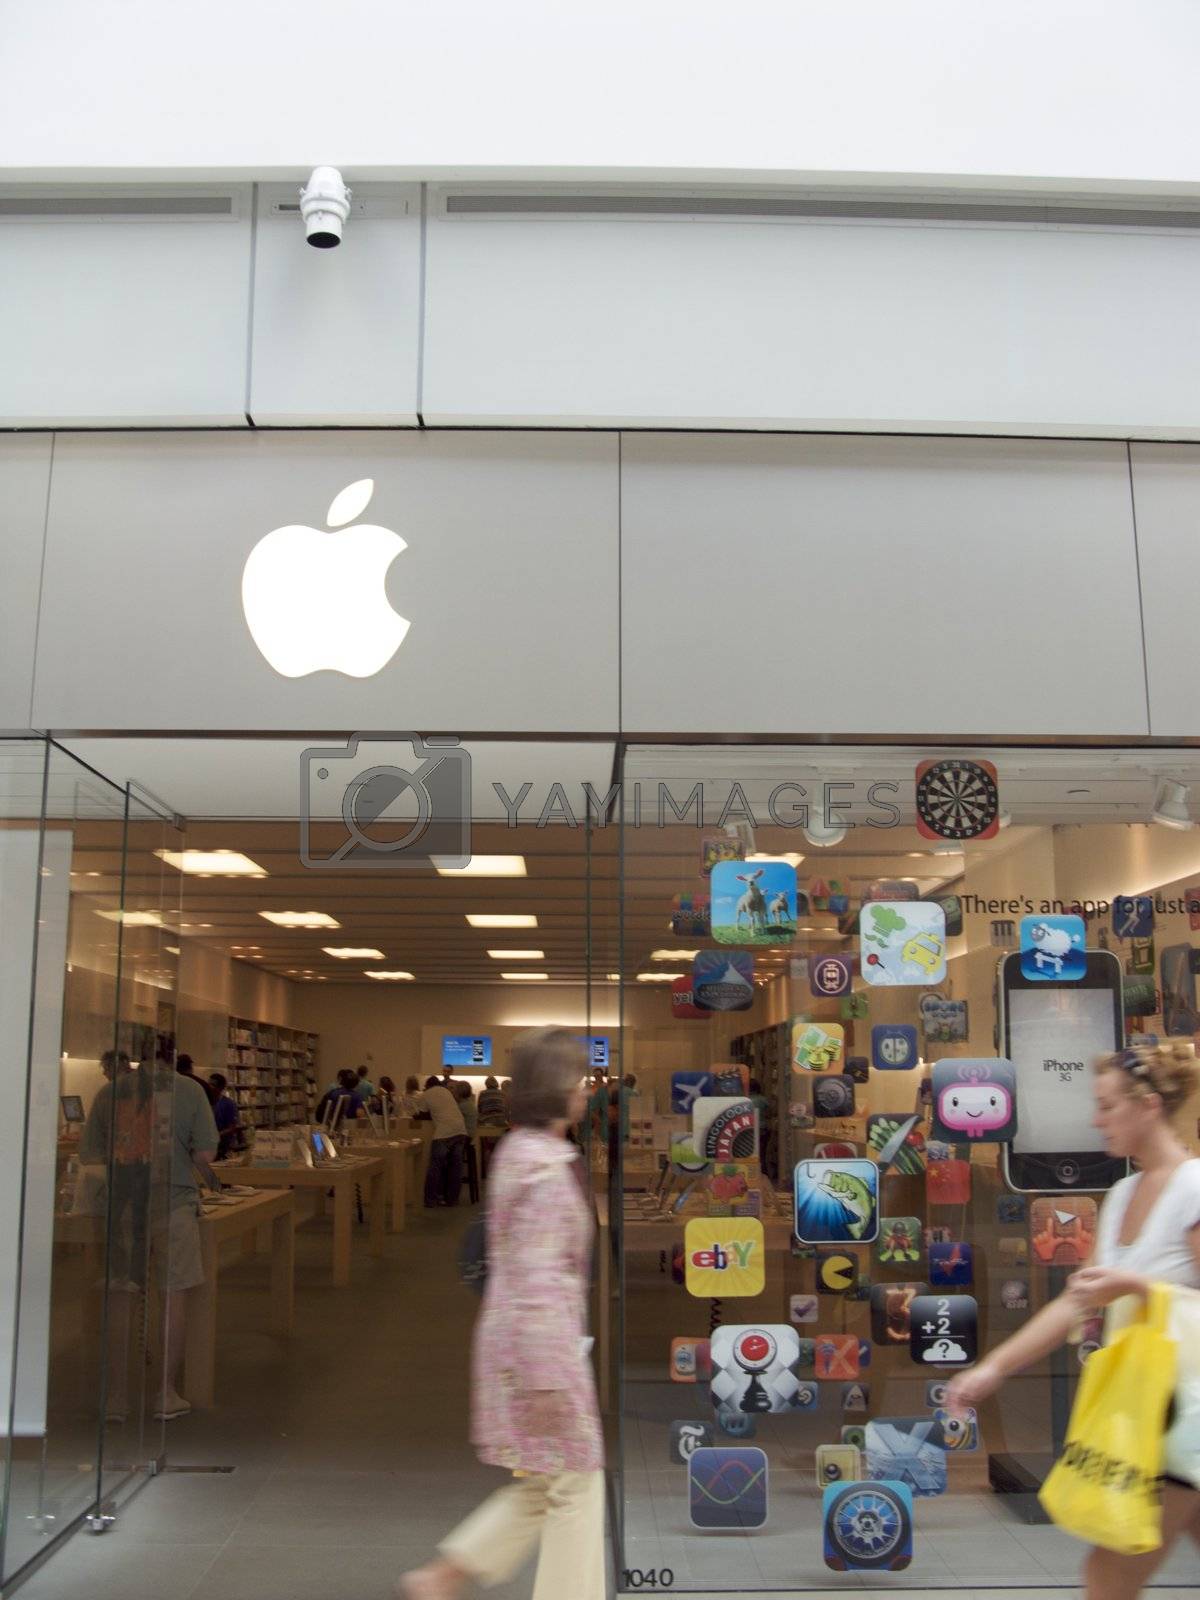 Royalty free image of Apple Store at Mall by jedphoto